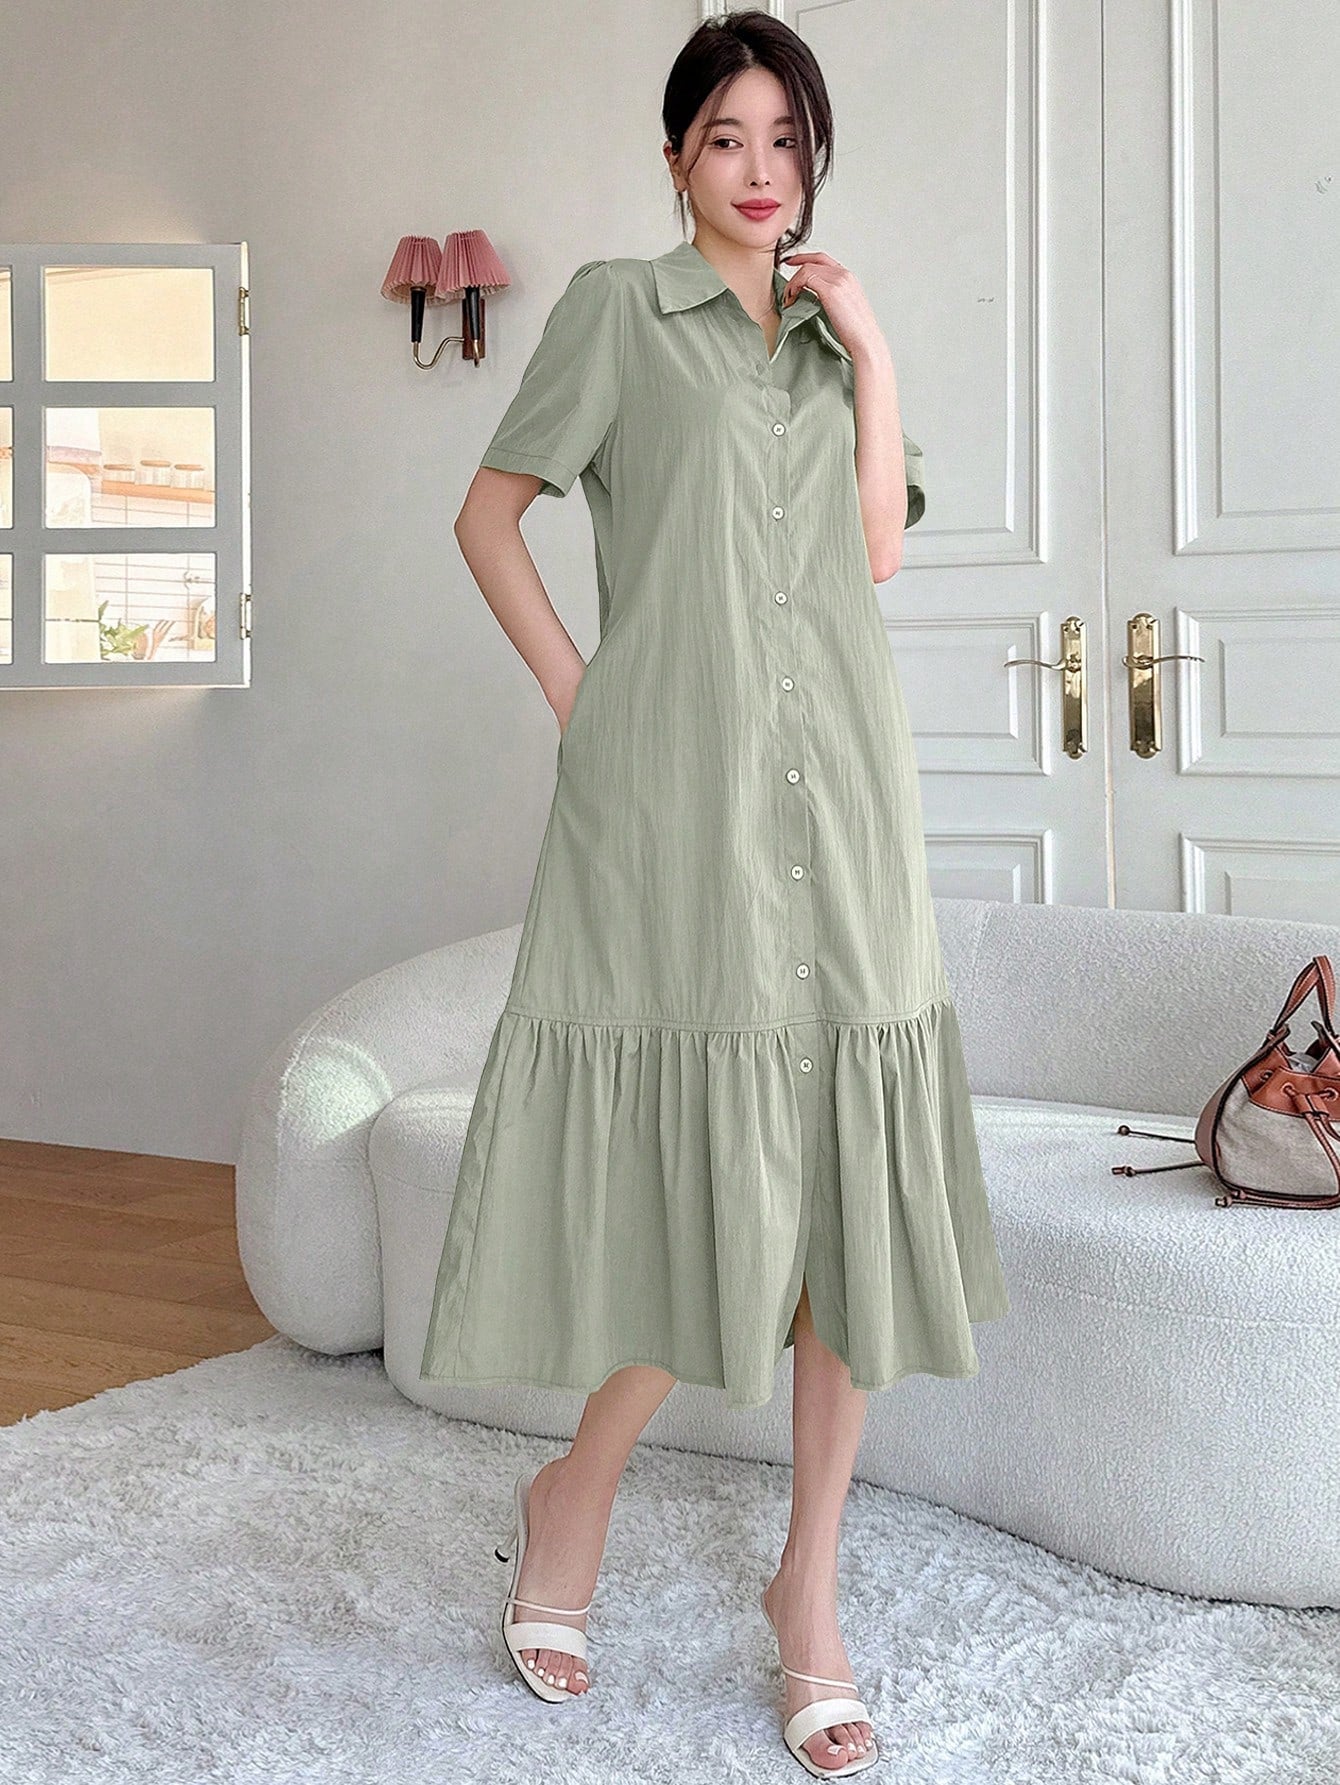 Loose Fit Bubble Sleeve Knee-Length Dress With Stand Collar, Button Front And Fish Tail Hem